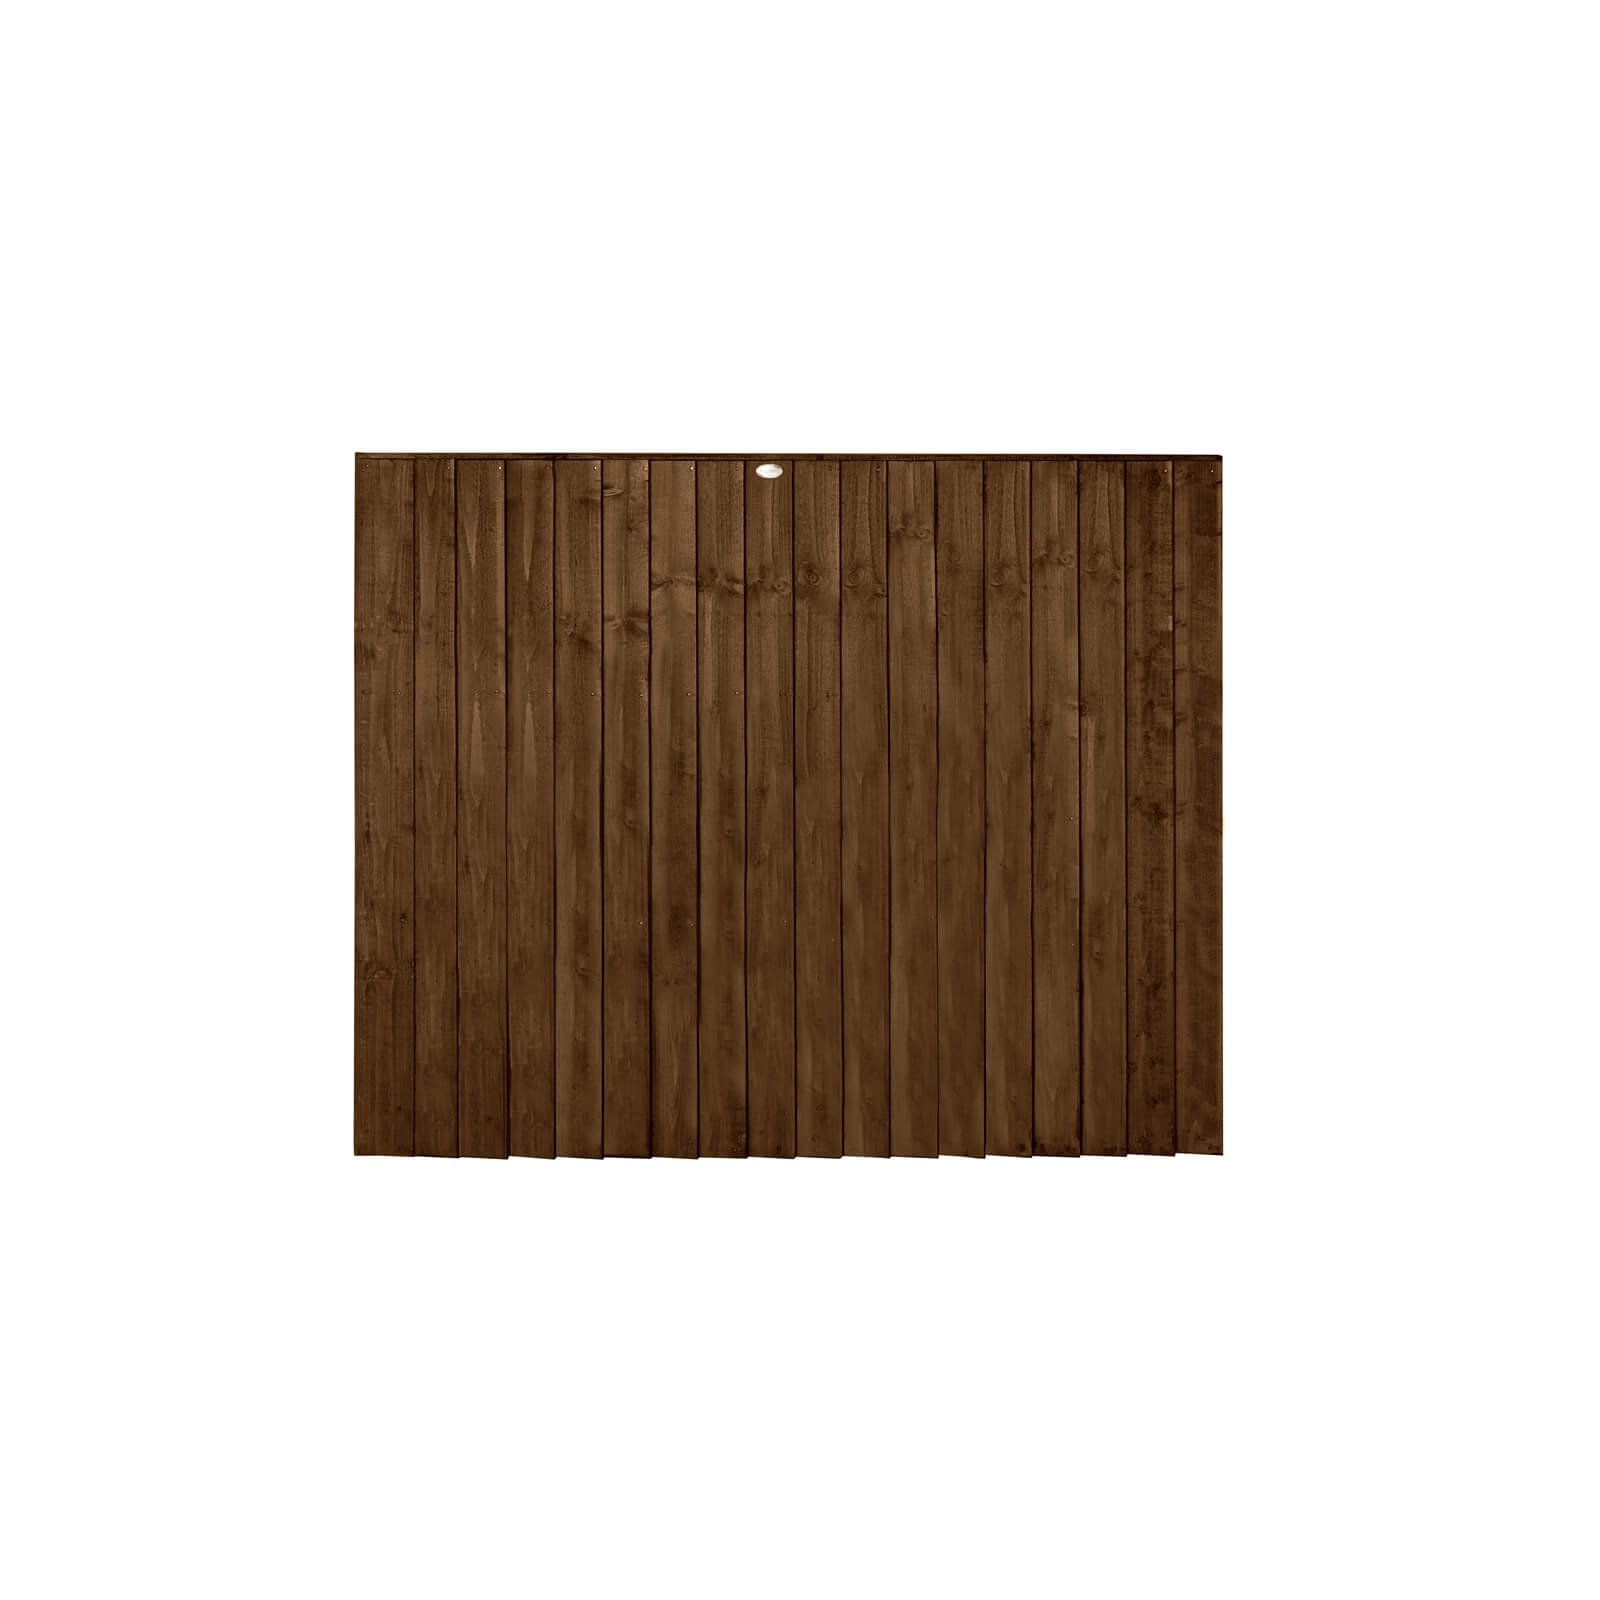 6ft x 5ft (1.83m x 1.54m) Pressure Treated Featheredge Fence Panel (Dark Brown) - Pack of 3